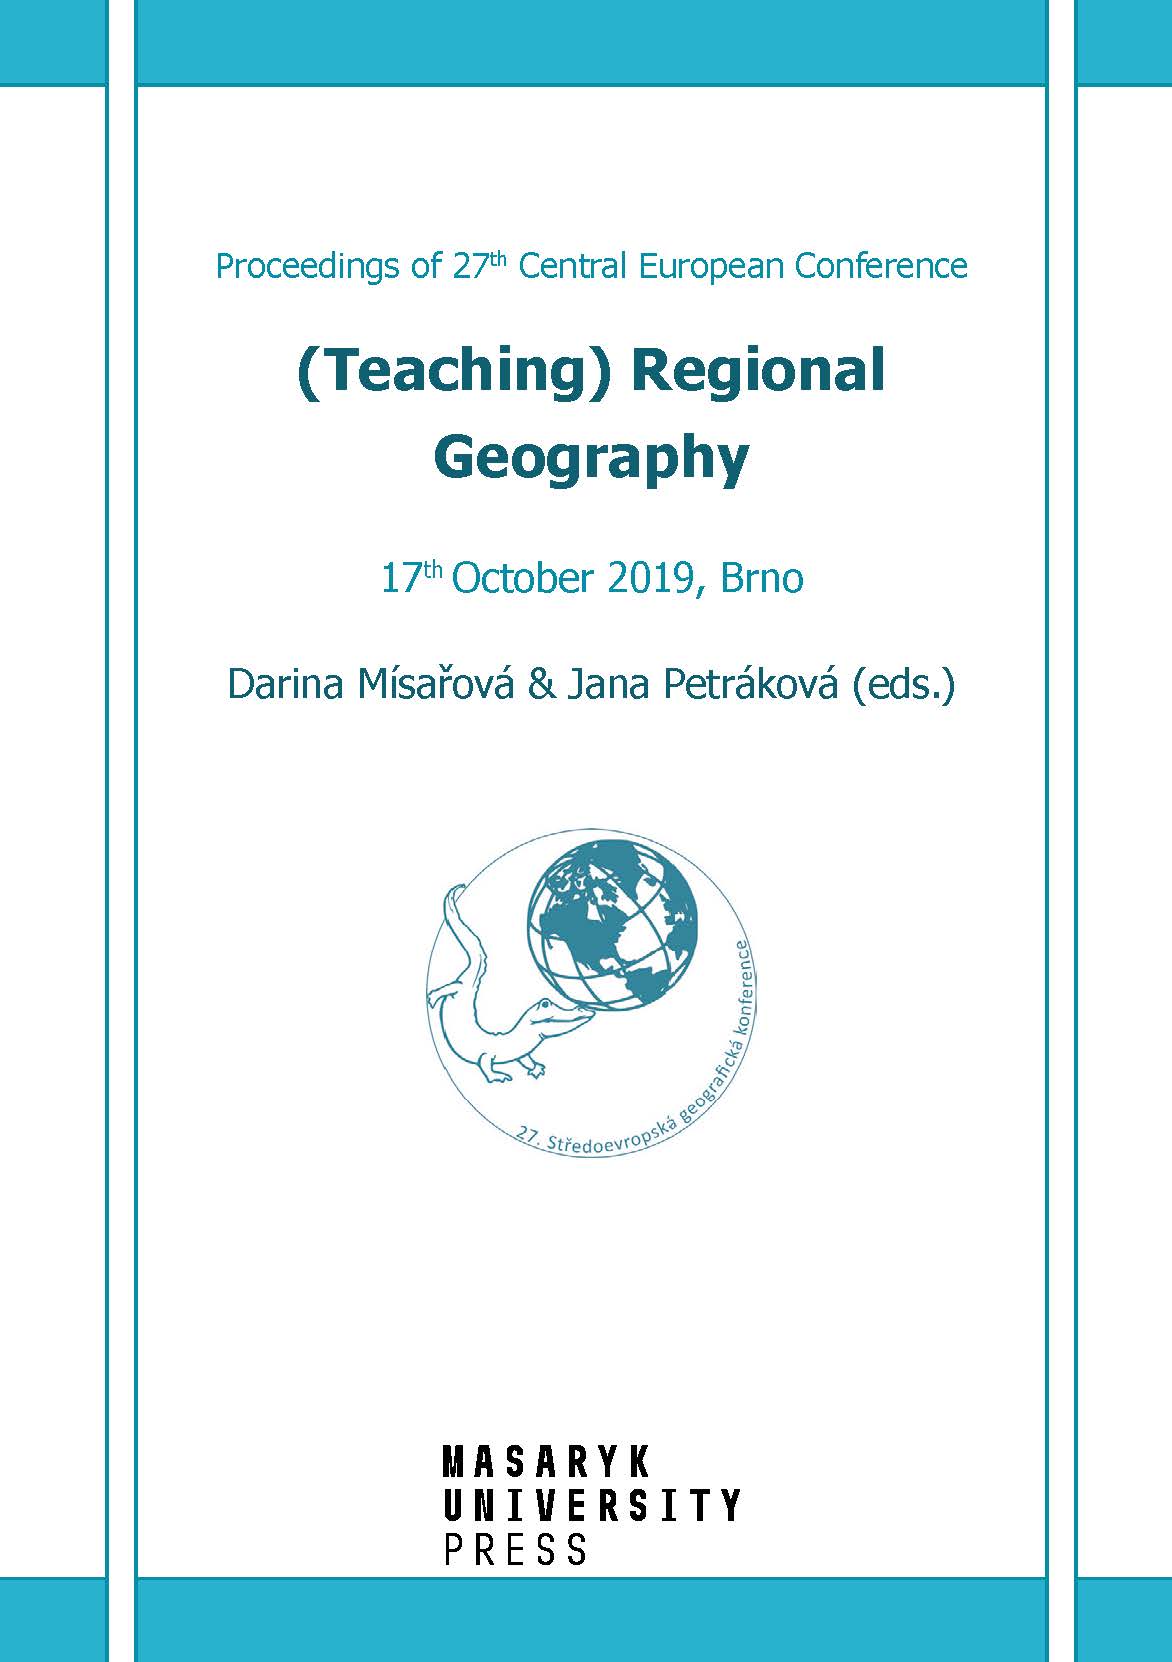 Obálka pro (Teaching) Regional Geography. Proceedings of 27th Central European Conference. 17th October 2019, Brno